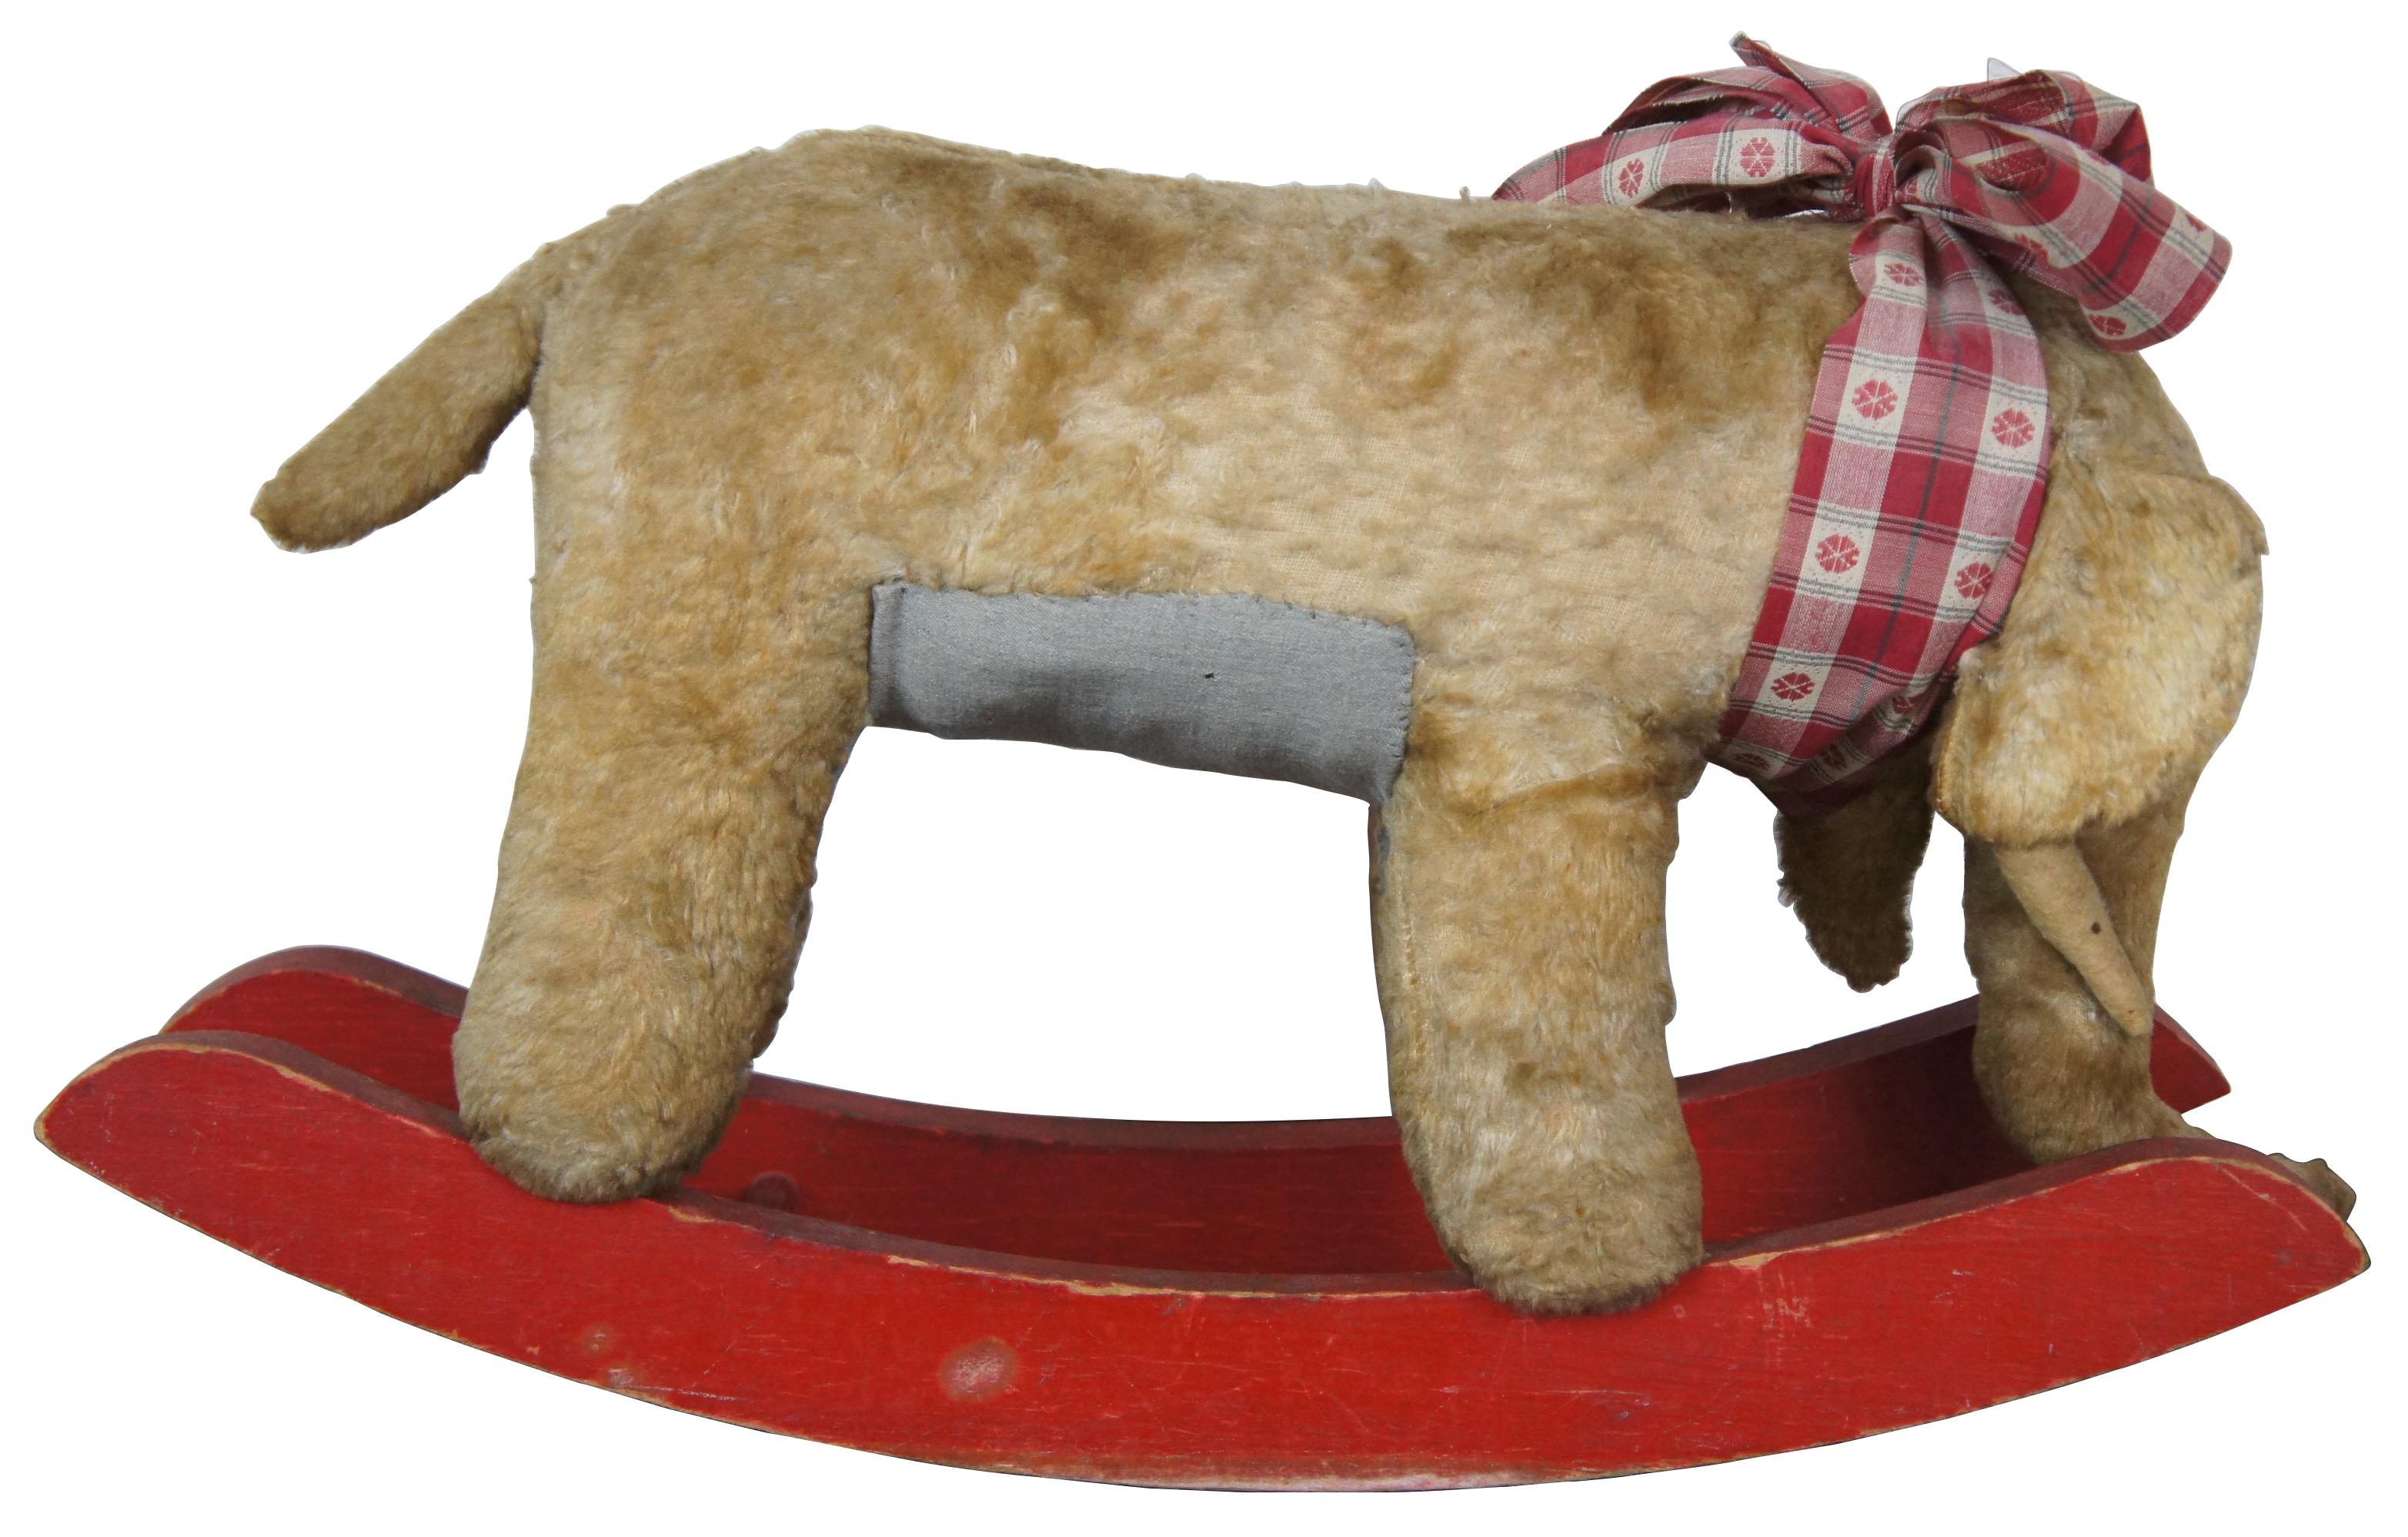 Antique mohair elephant shaped rocking horse on painted red rockers with black button eyes and sporting a gingham bow. Measures: 24